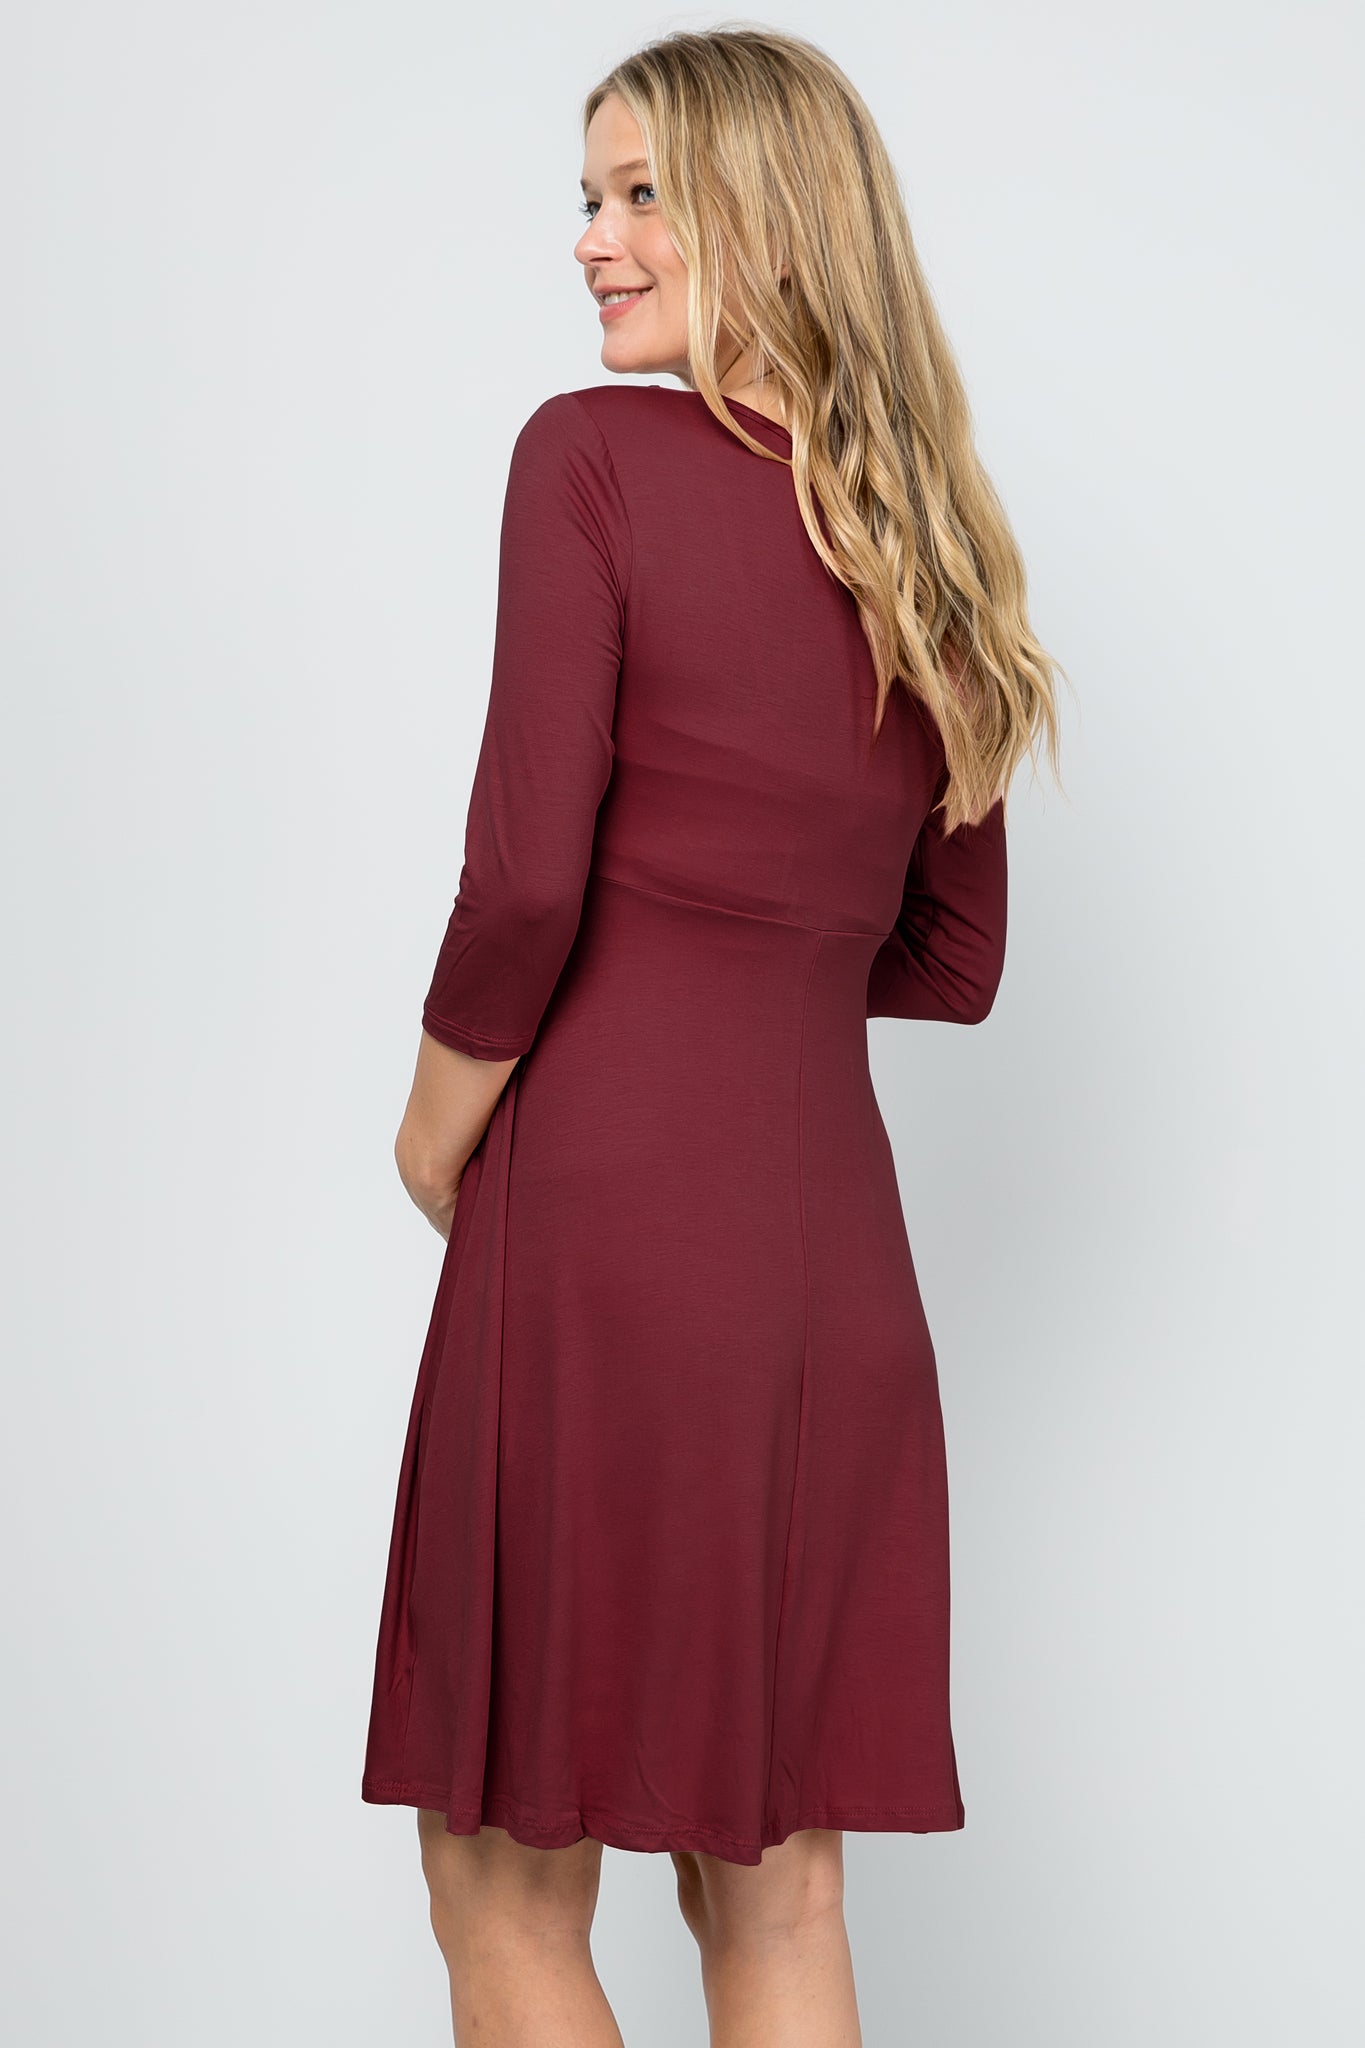 My Bump 3/4 Sleeve Surplice Fit and Flare Maternity Dress